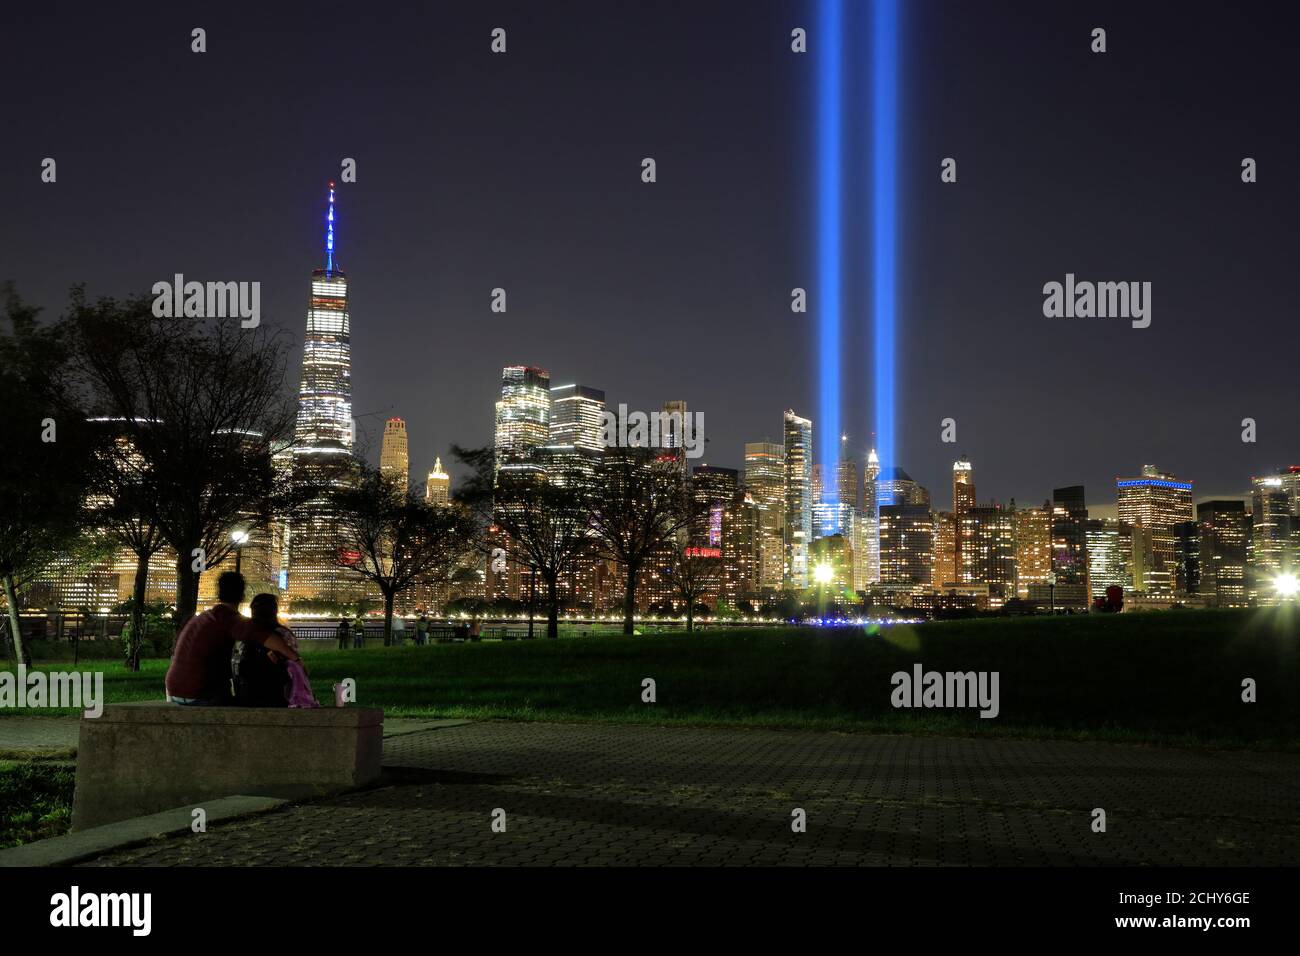 The annual "Tribute in Light" light beams project in night sky of Lower Manhattan to memorial Sept.11 terrorist attacks victims with people viewing it in Liberty State Park in foreground.New Jersey.USA Stock Photo